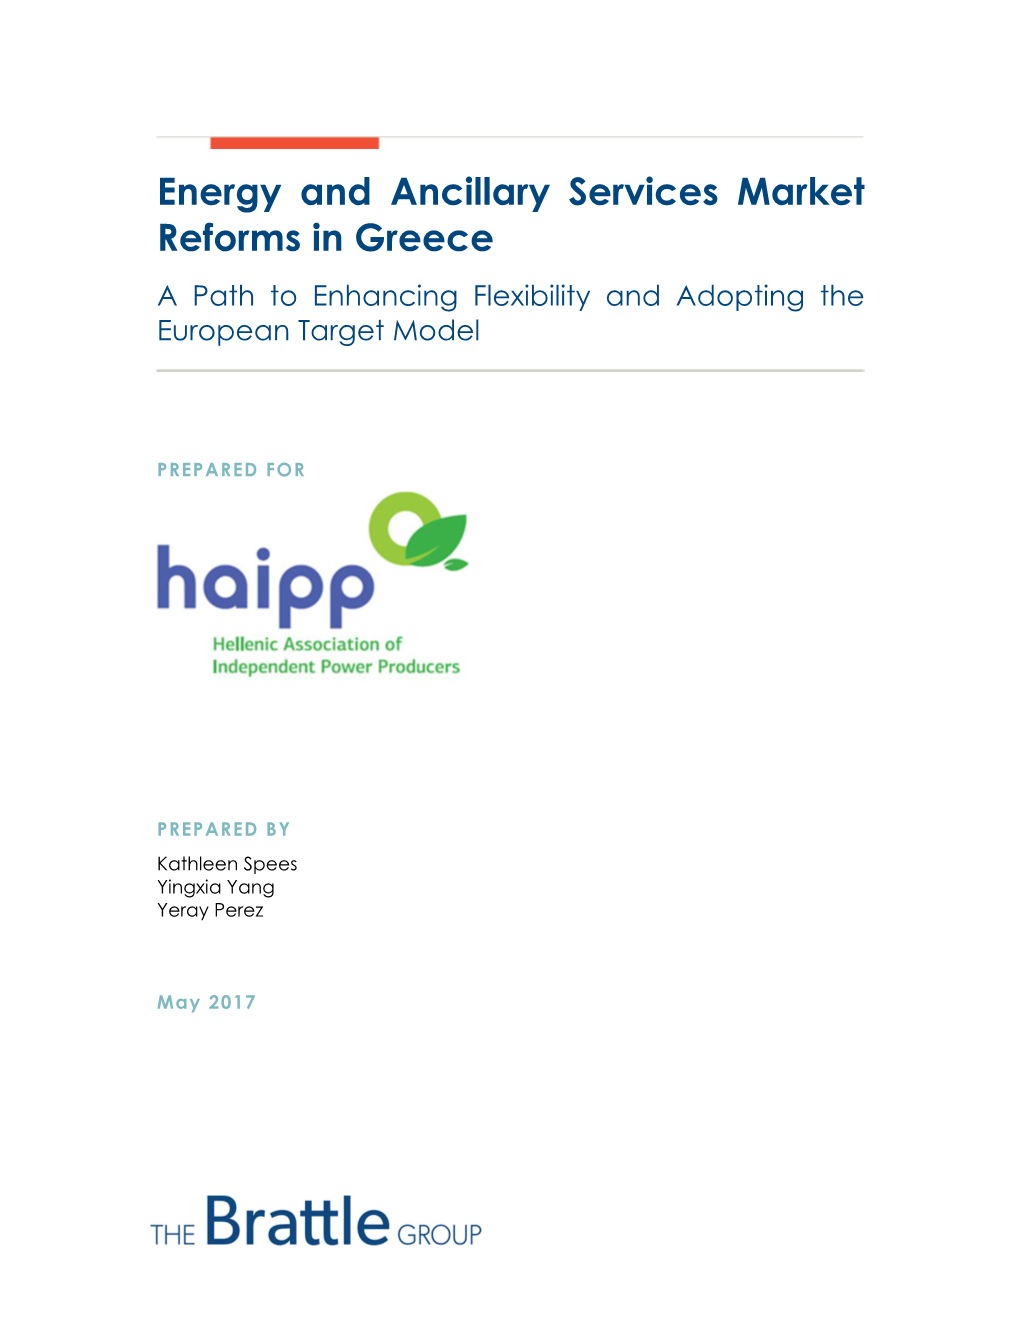 Energy and Ancillary Services Market Reforms in Greece a Path to Enhancing Flexibility and Adopting the European Target Model